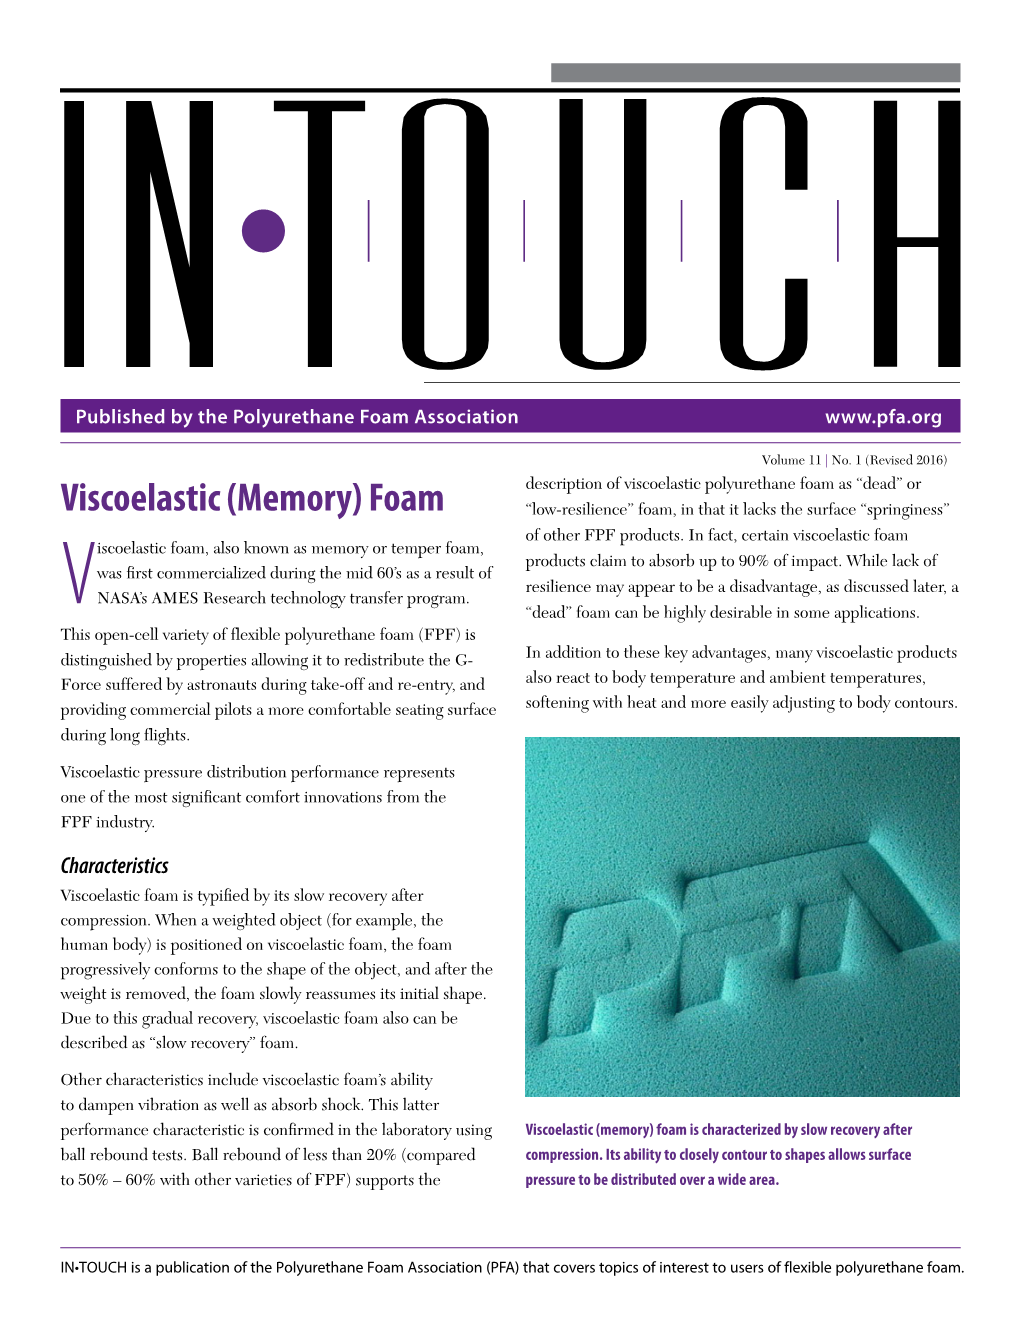 Viscoelastic (Memory) Foam “Low-Resilience” Foam, in That It Lacks the Surface “Springiness” of Other FPF Products